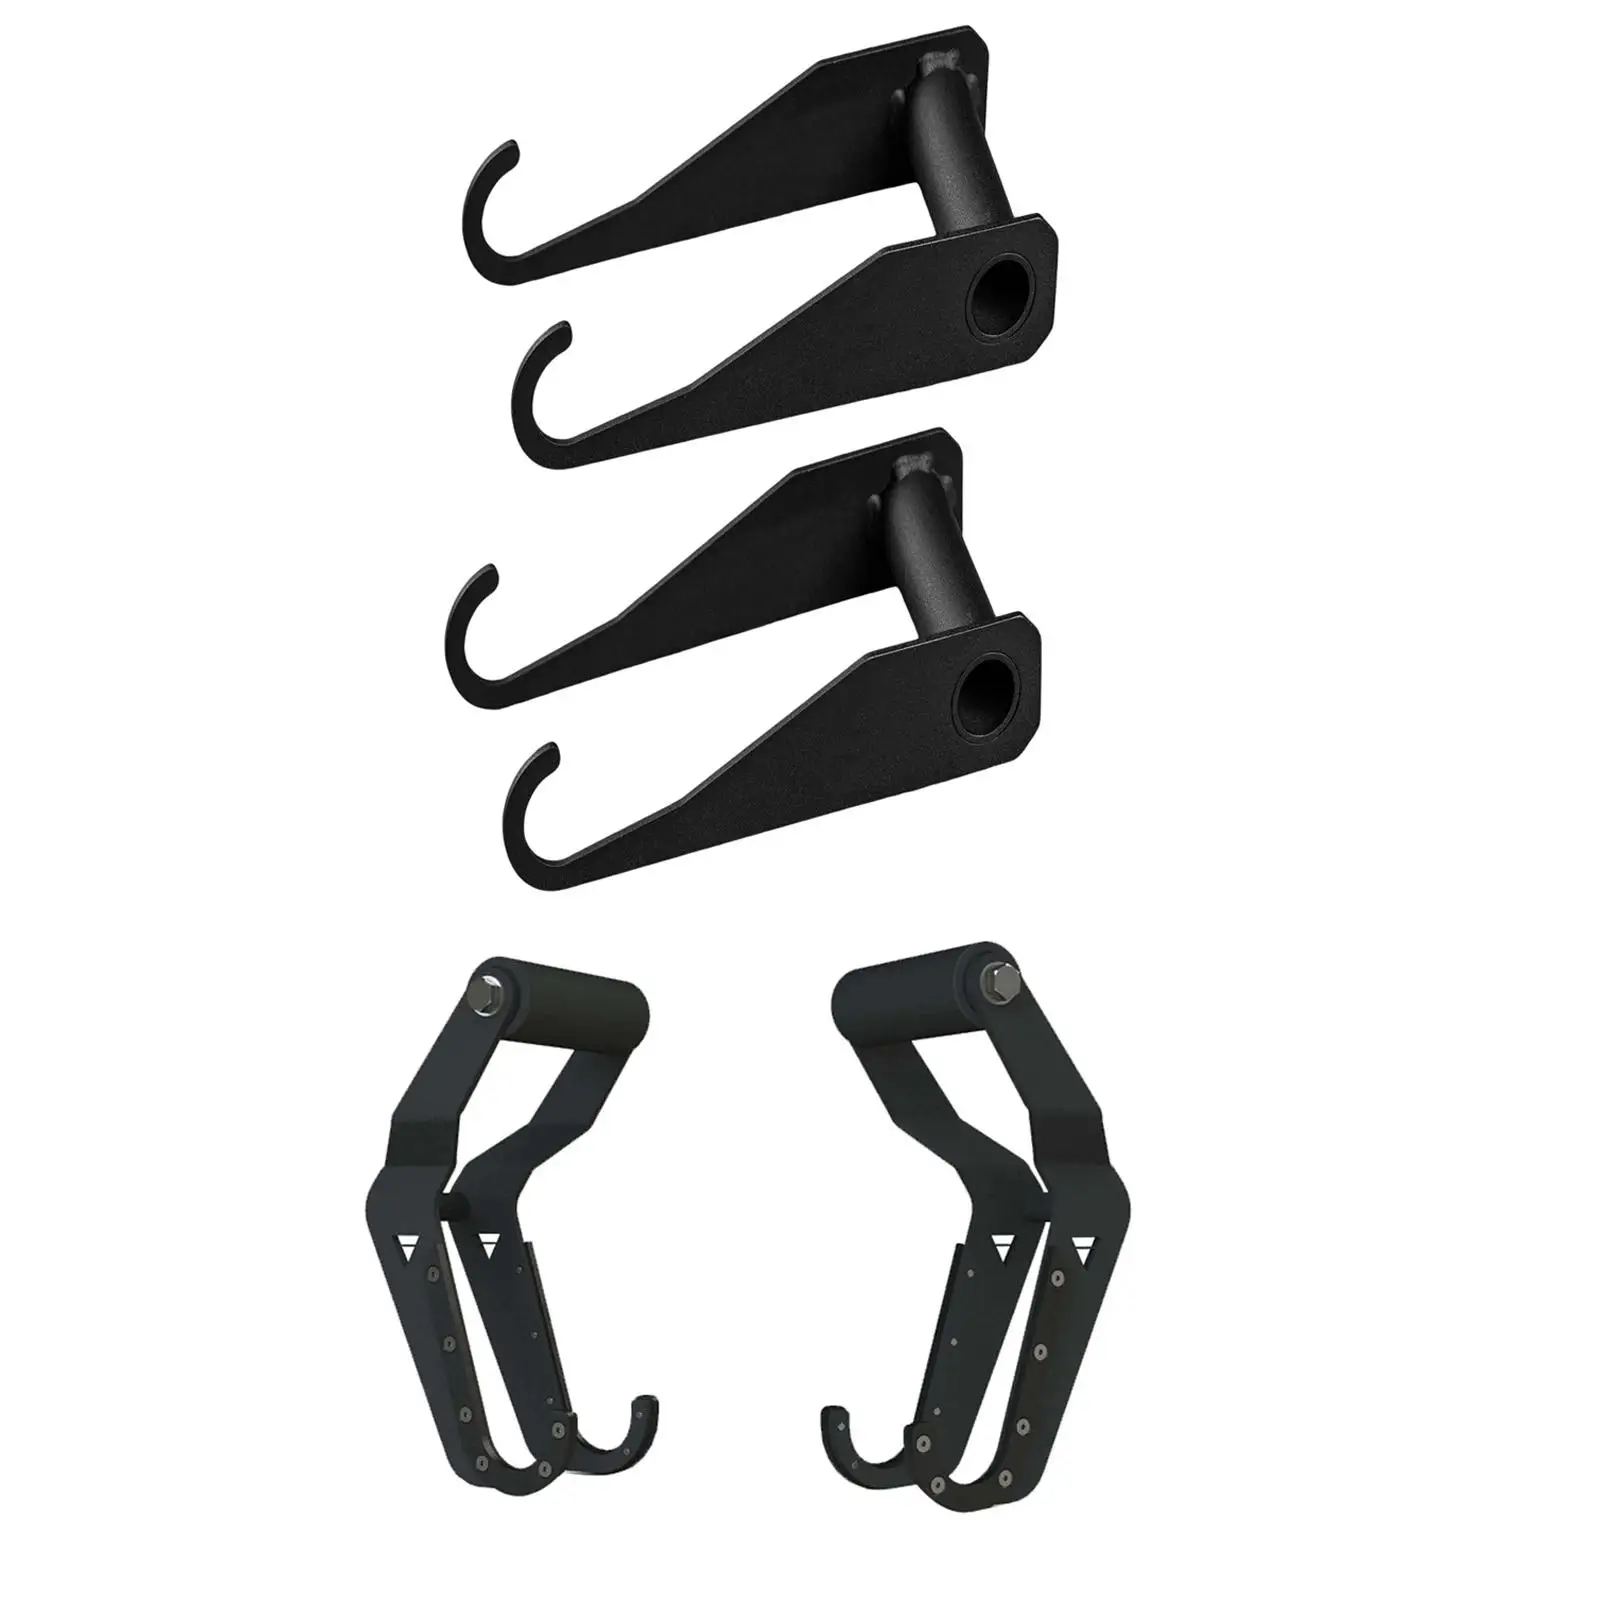 

Durable Dumbbell Hooks Handles Attachment Accessories Kettlebell Grip for Workout Home Exercise Weightlifting Strength Training